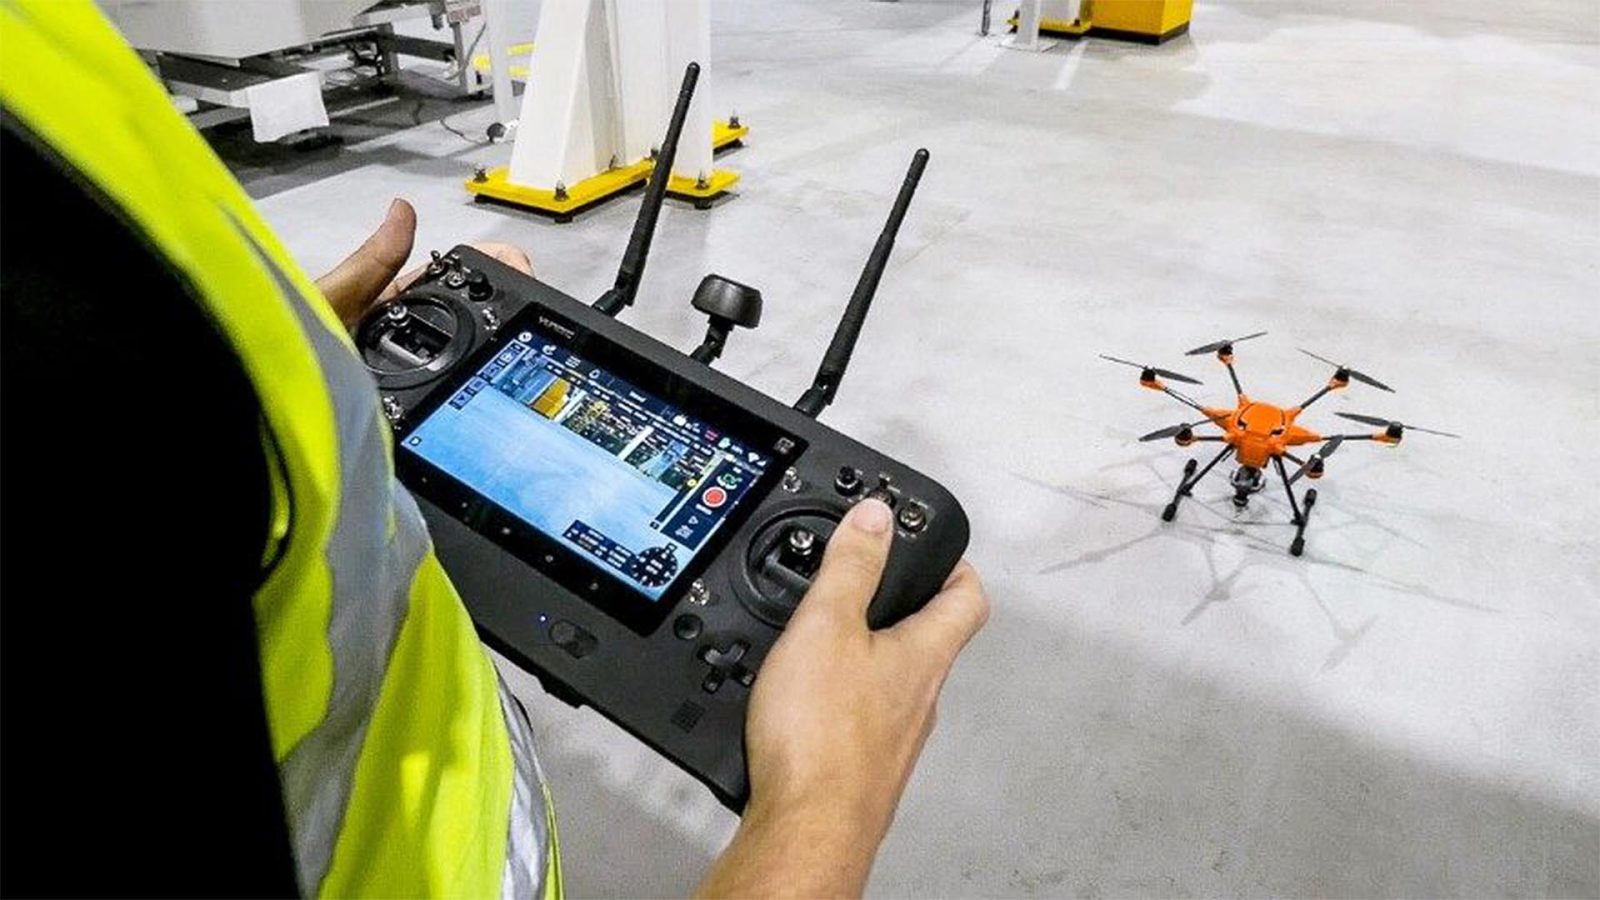 Ford plant in United Kingdom is using drones to inspect large machinery